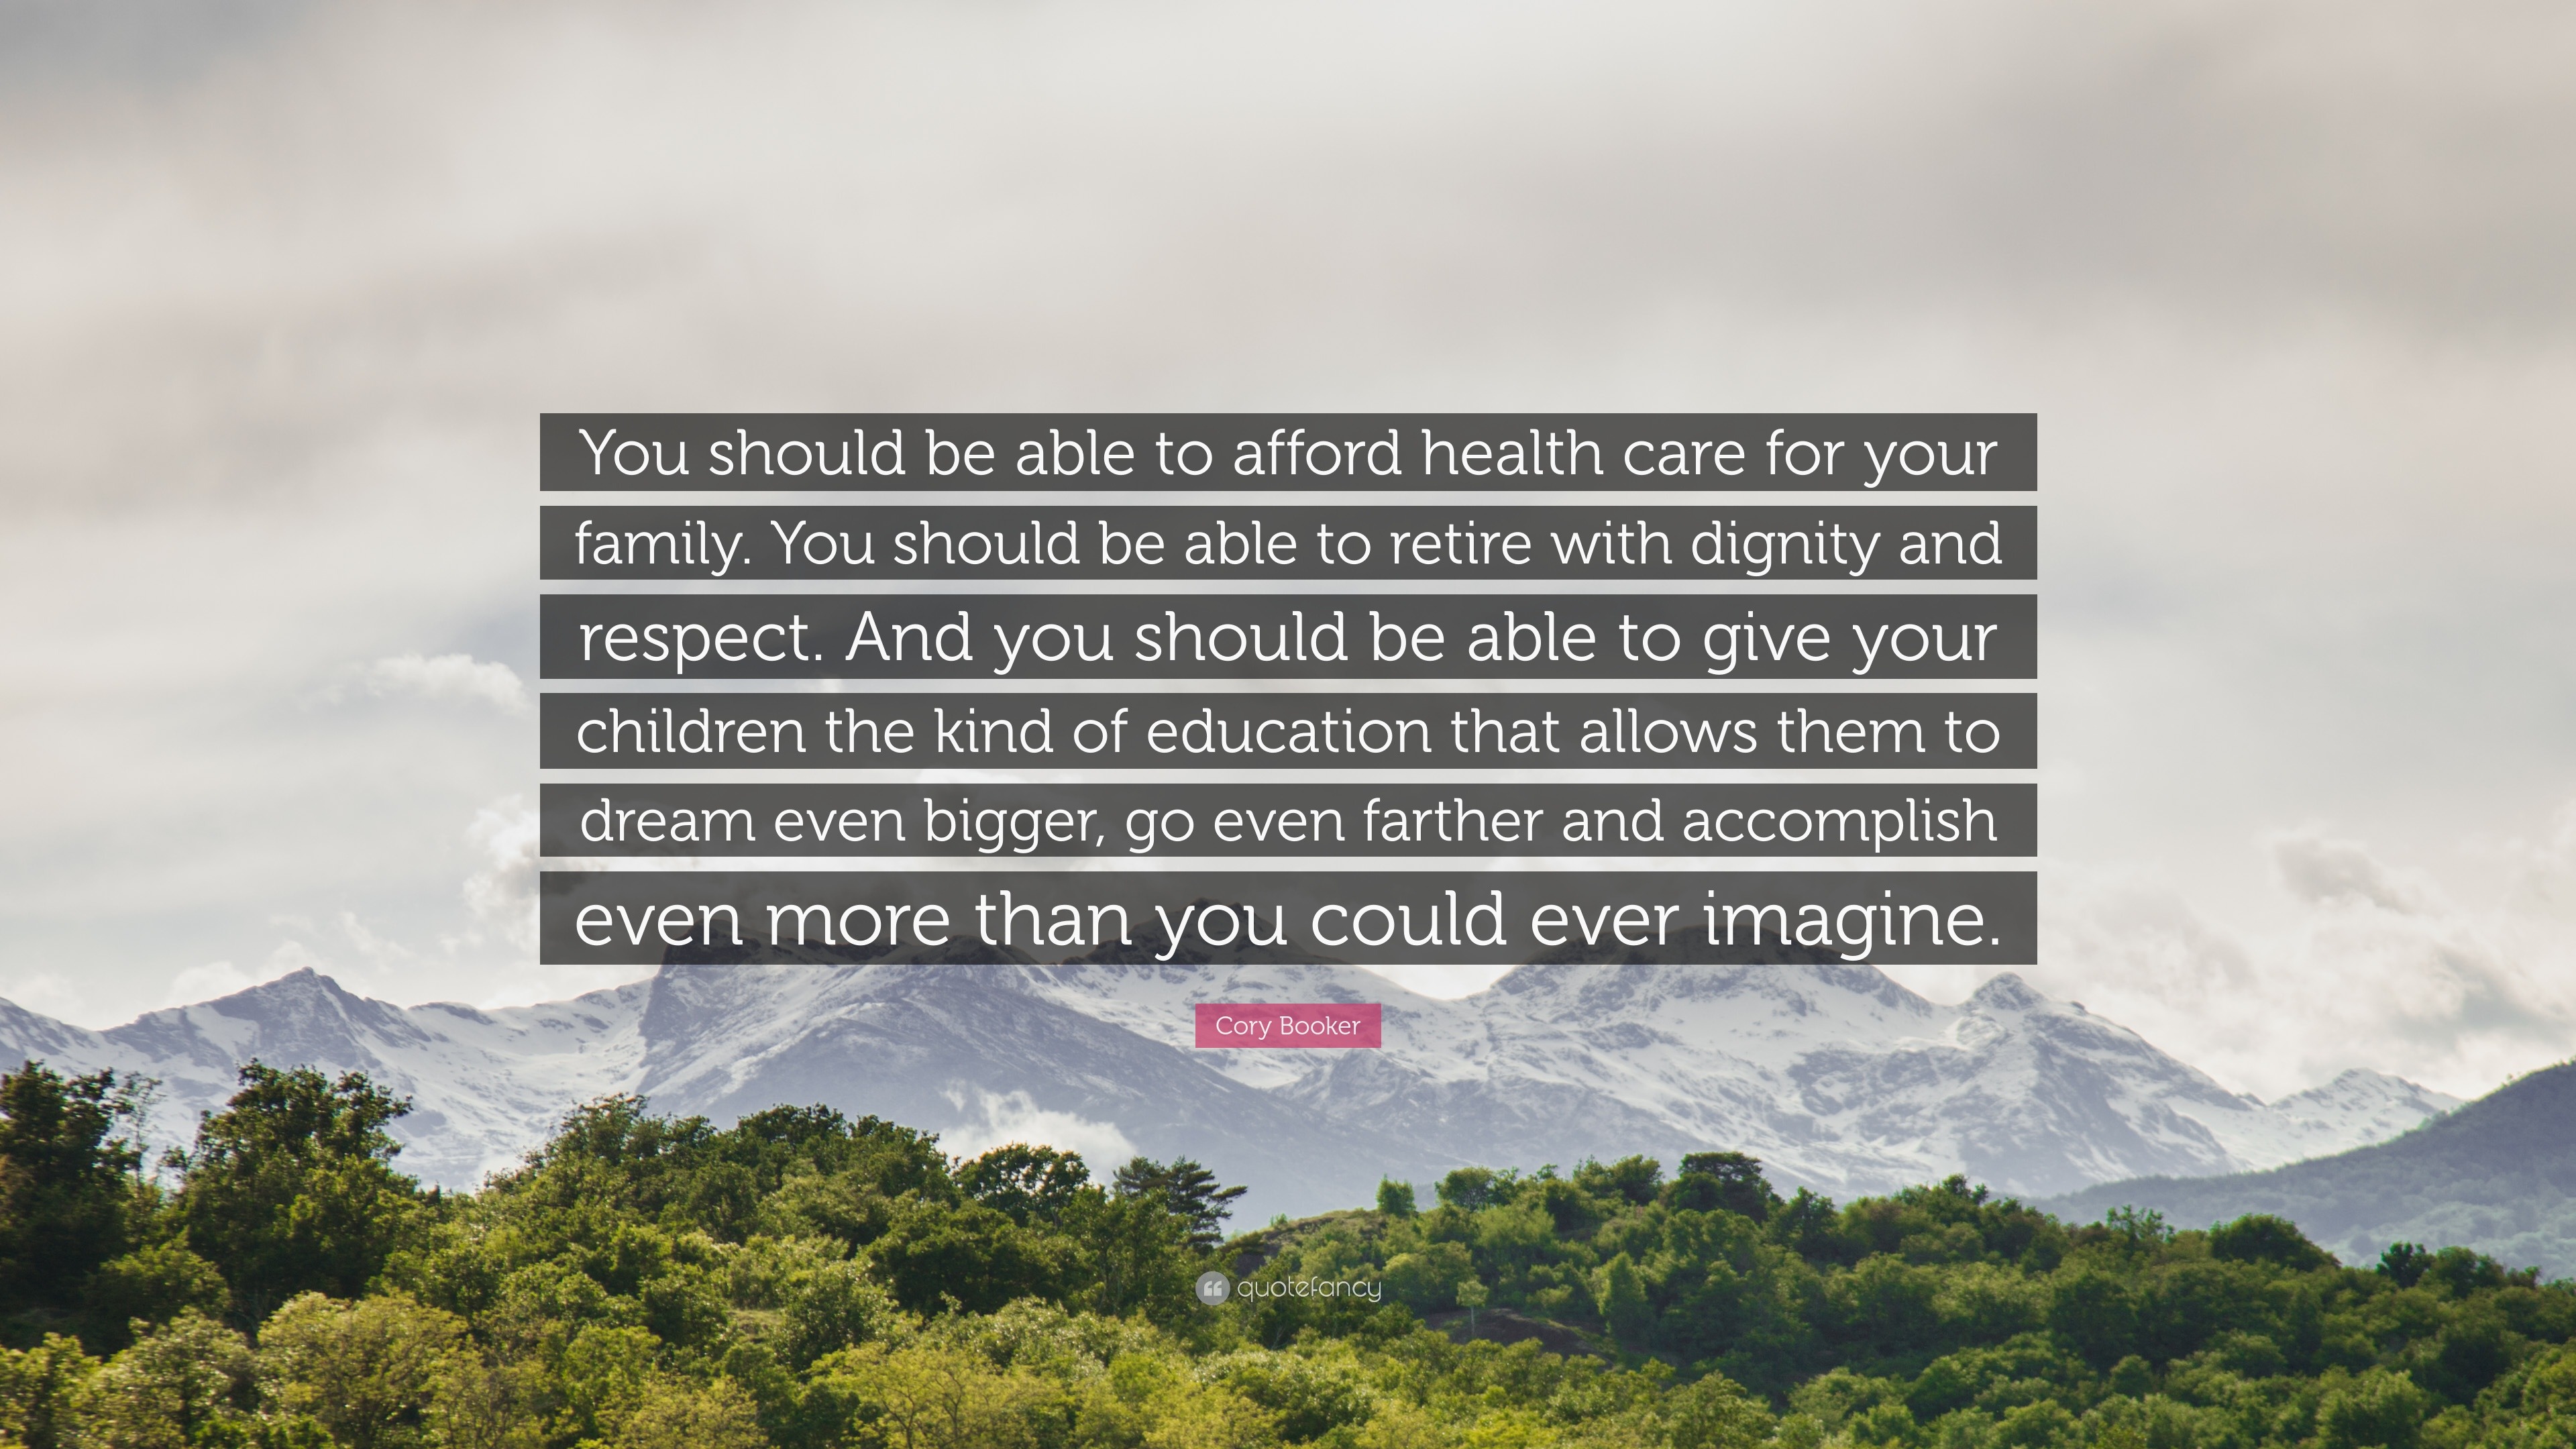 Cory Booker Quote: “You should be able to afford health care for